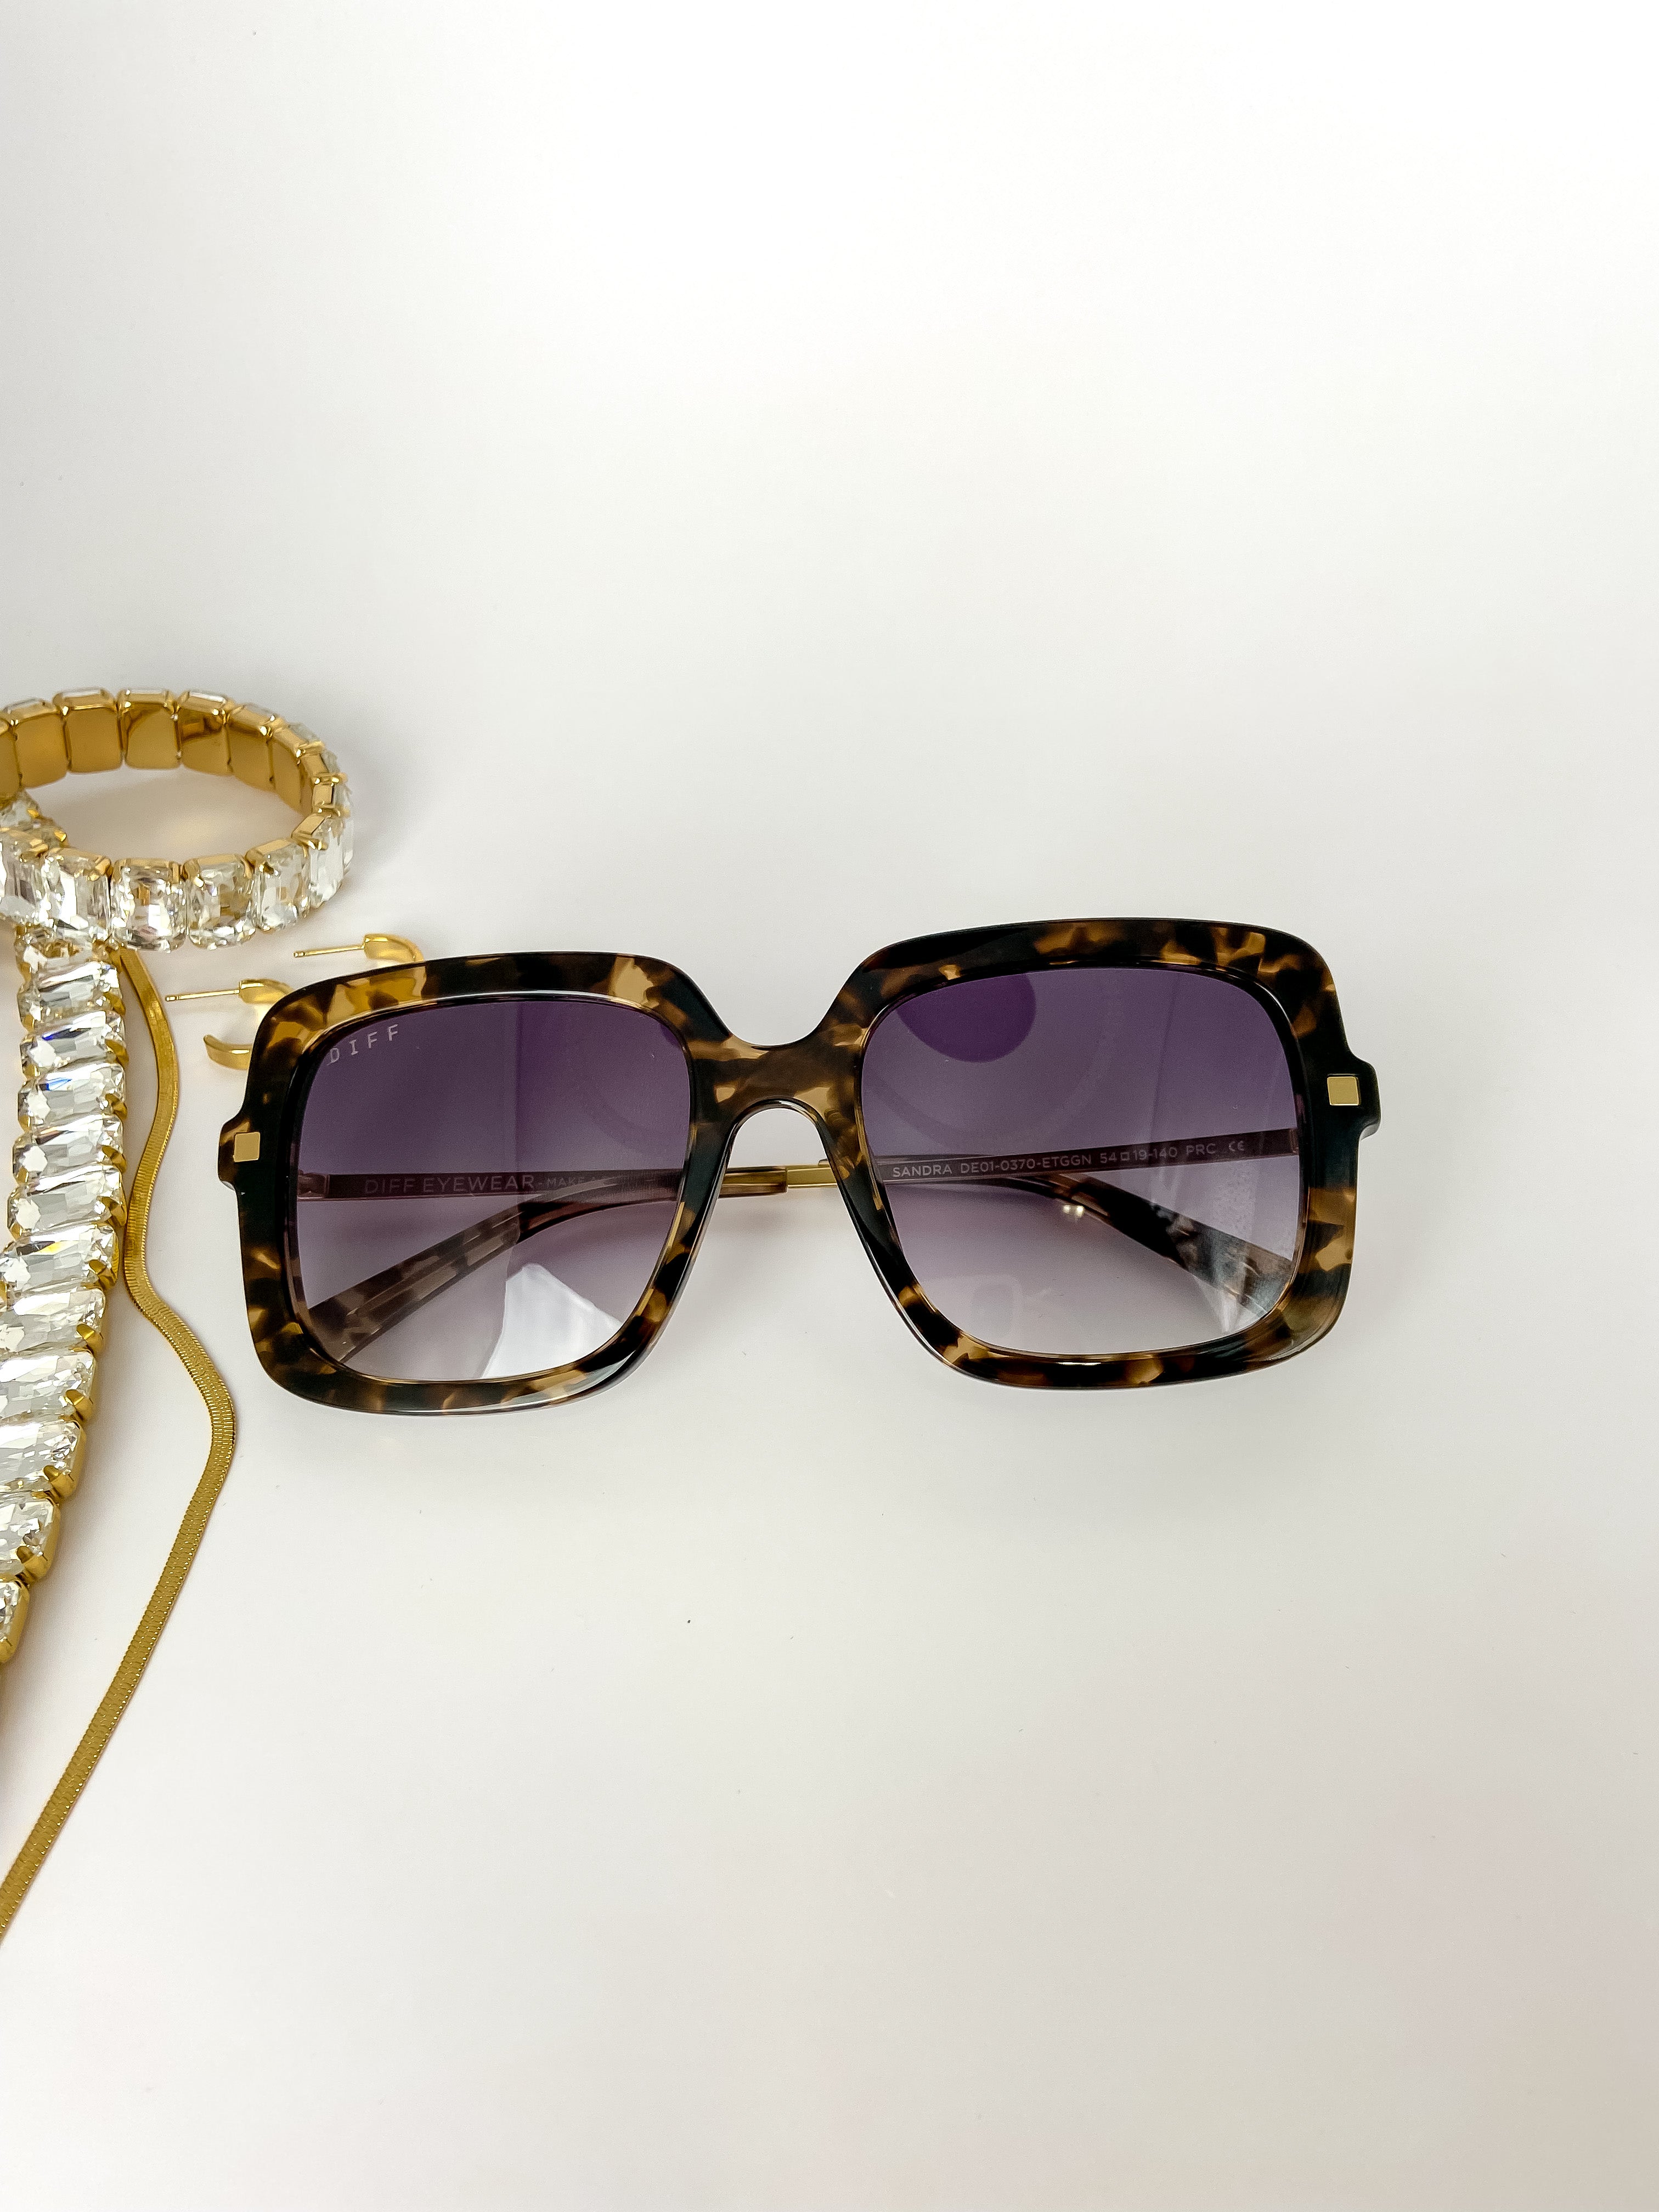 DIFF | Sandra Grey Gradient Lens Sunglasses in Espresso Tortoise - Giddy Up Glamour Boutique